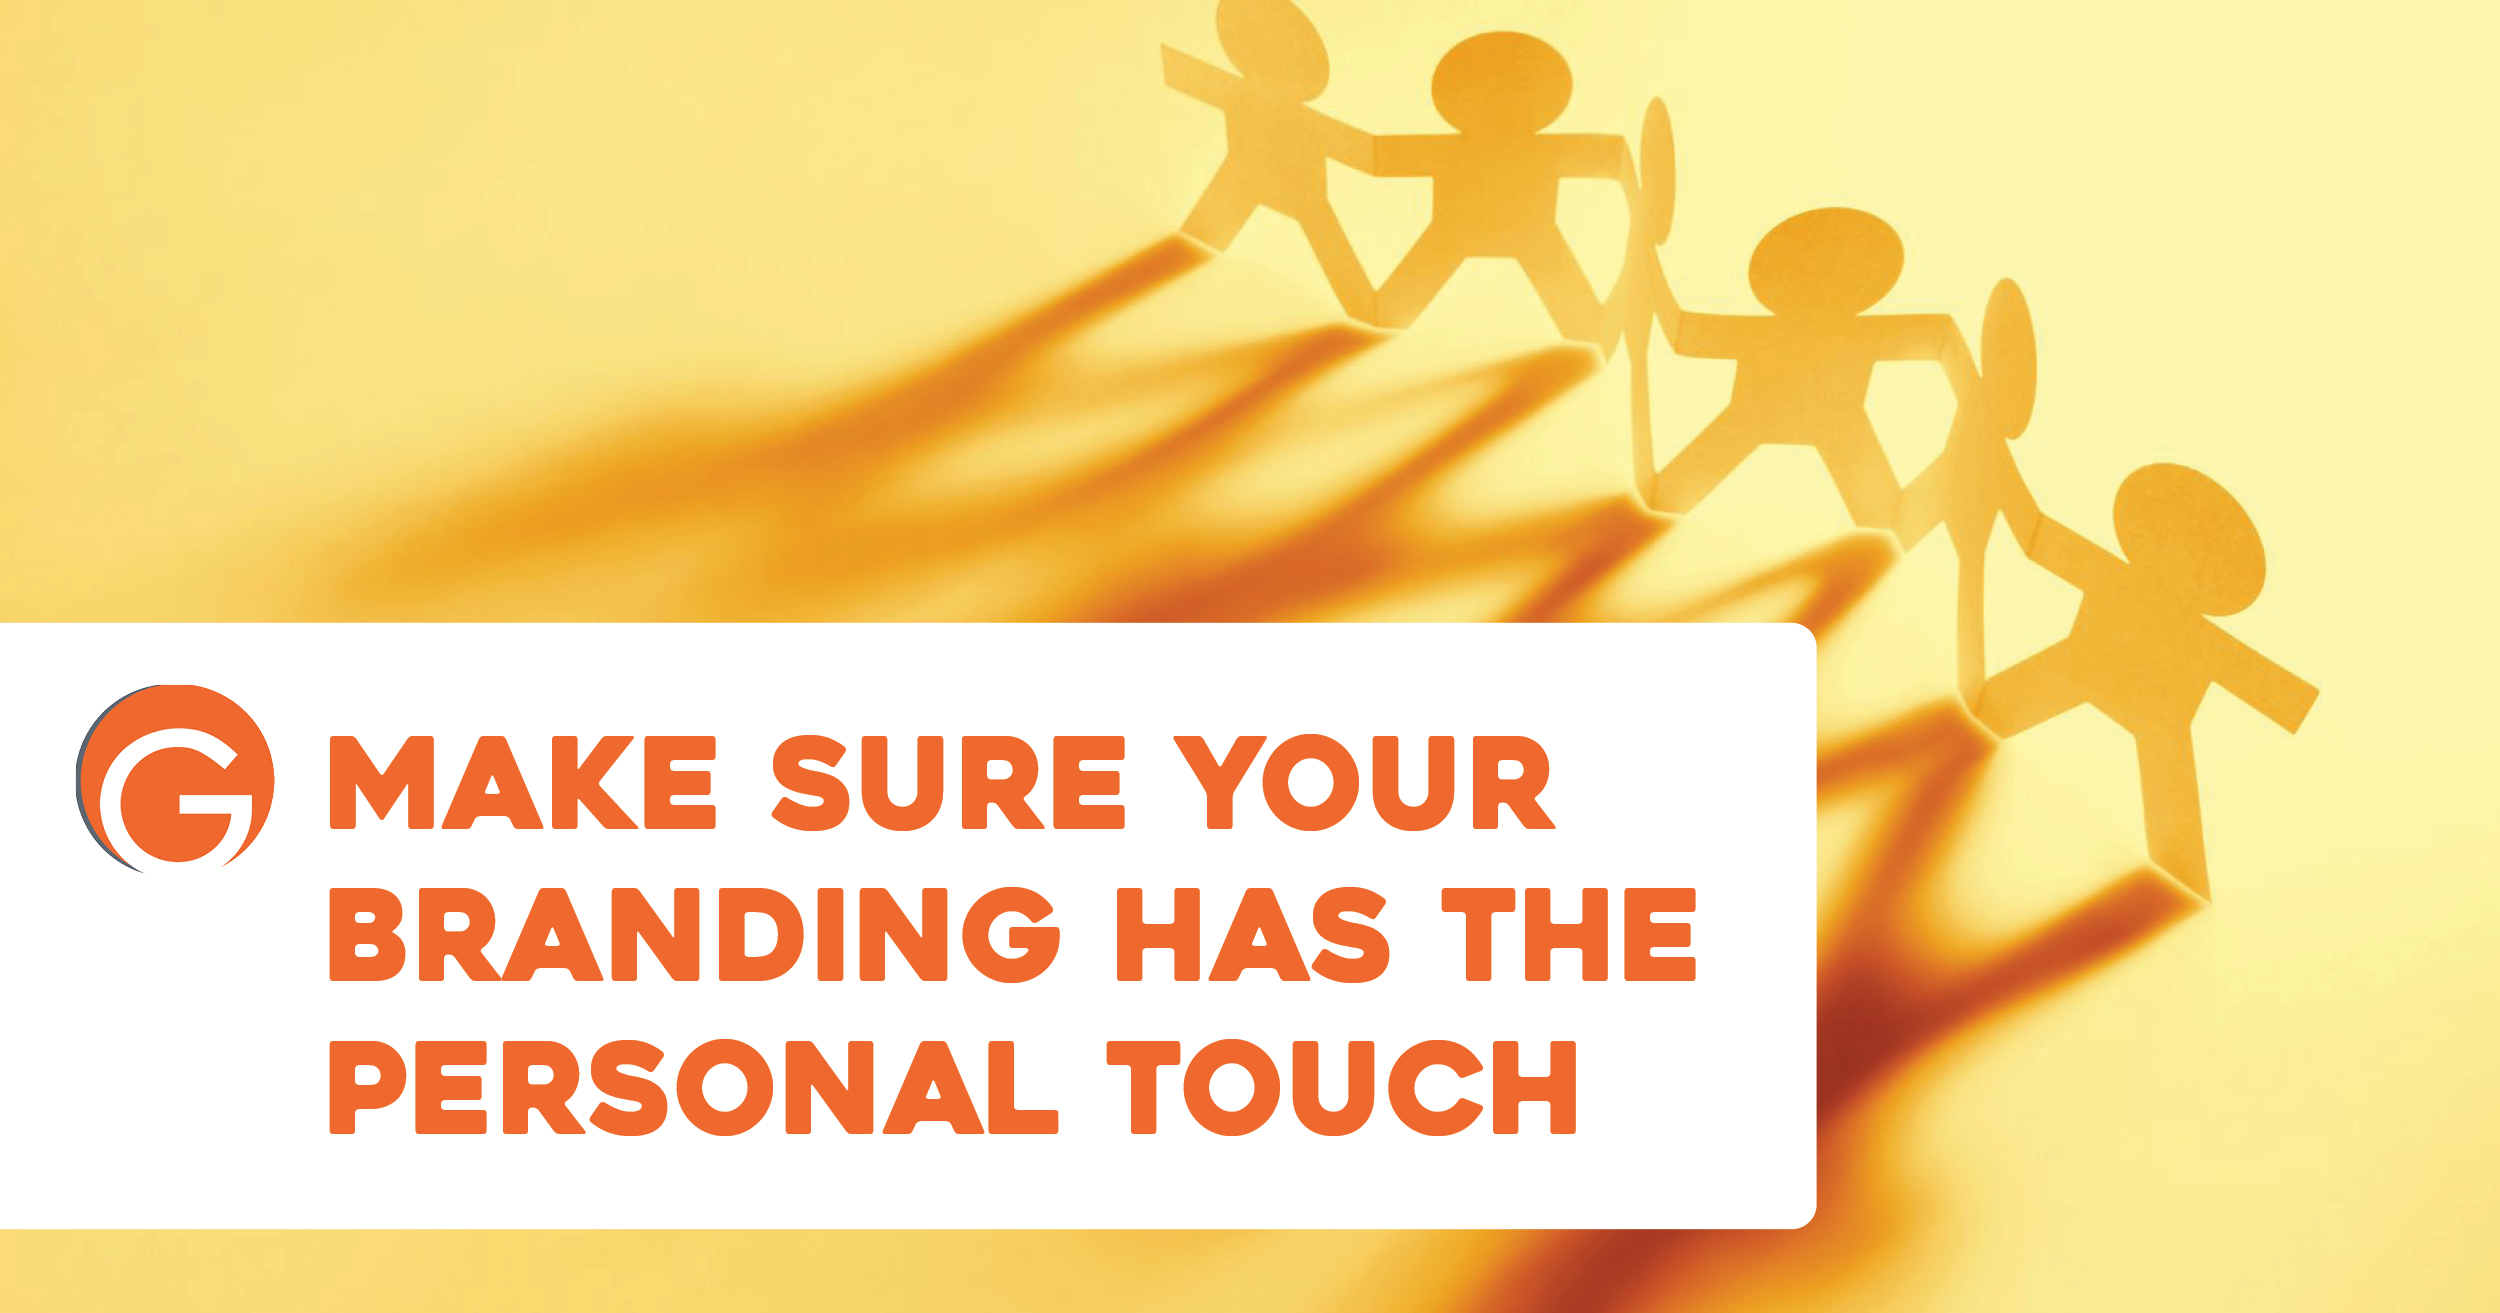 Make sure your branding has the personal touch